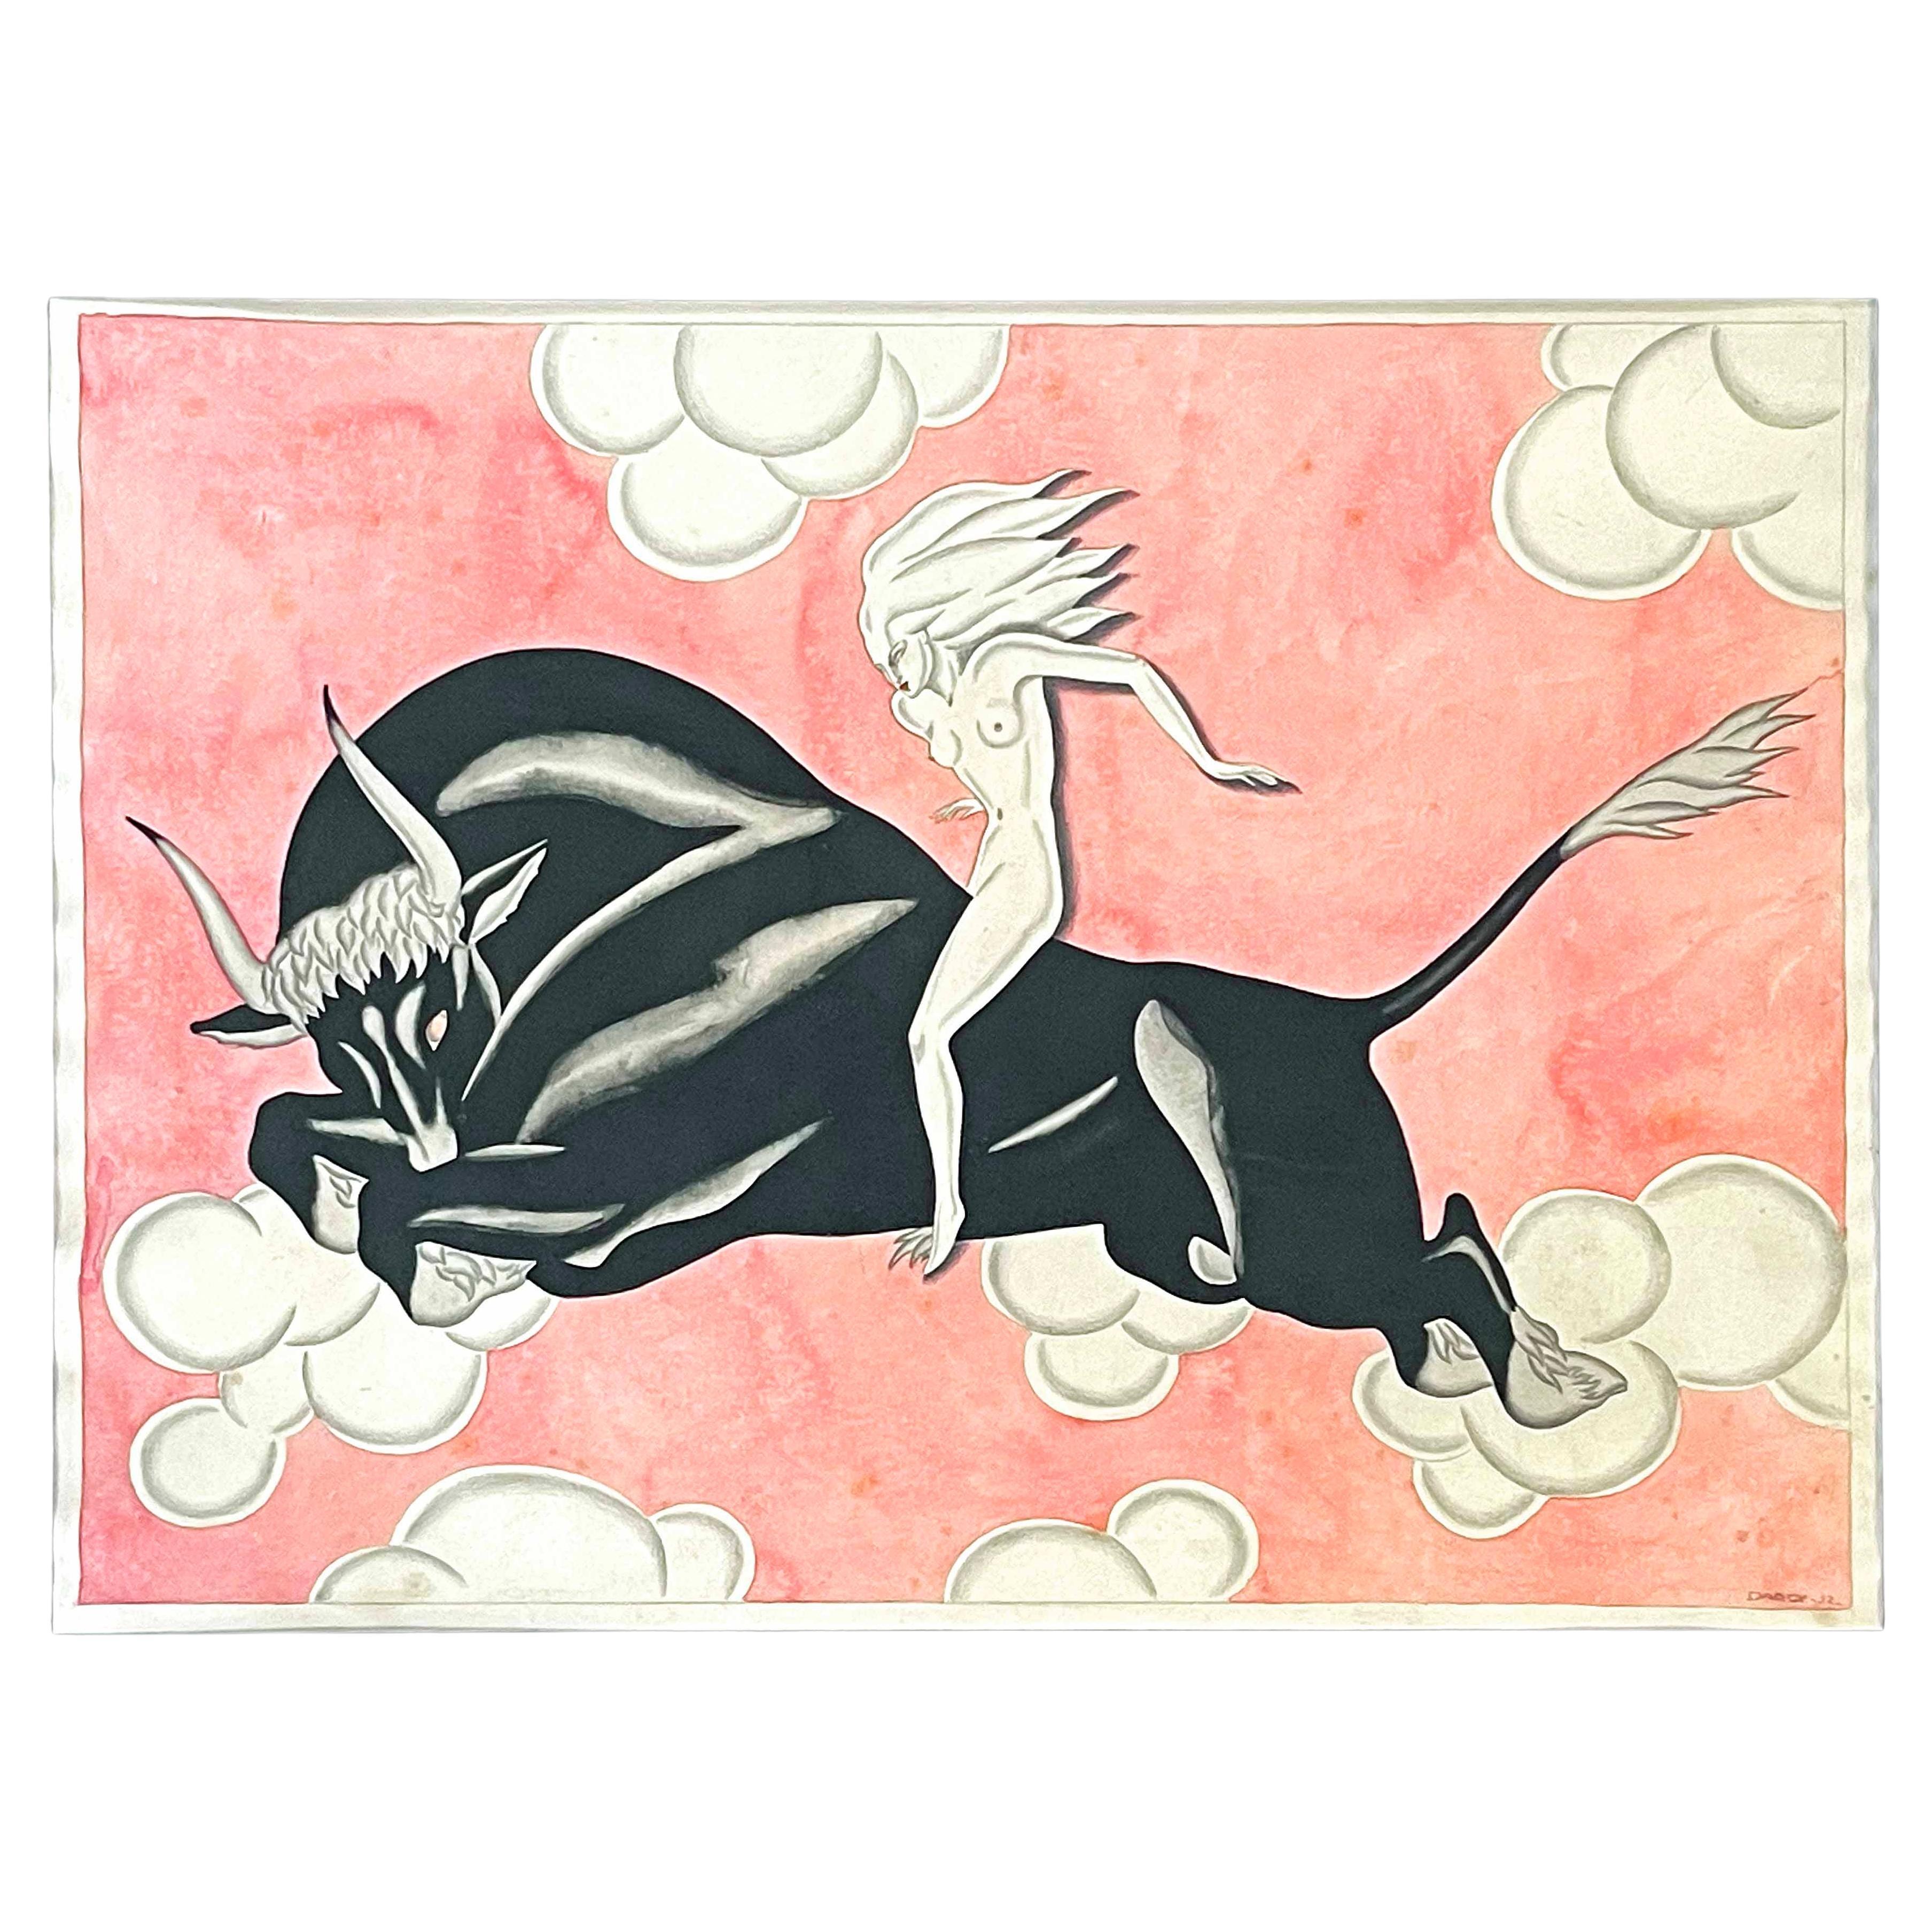 "Europa and the Bull", Bold Art Deco Depiction of Mythological Theme by Darcy For Sale